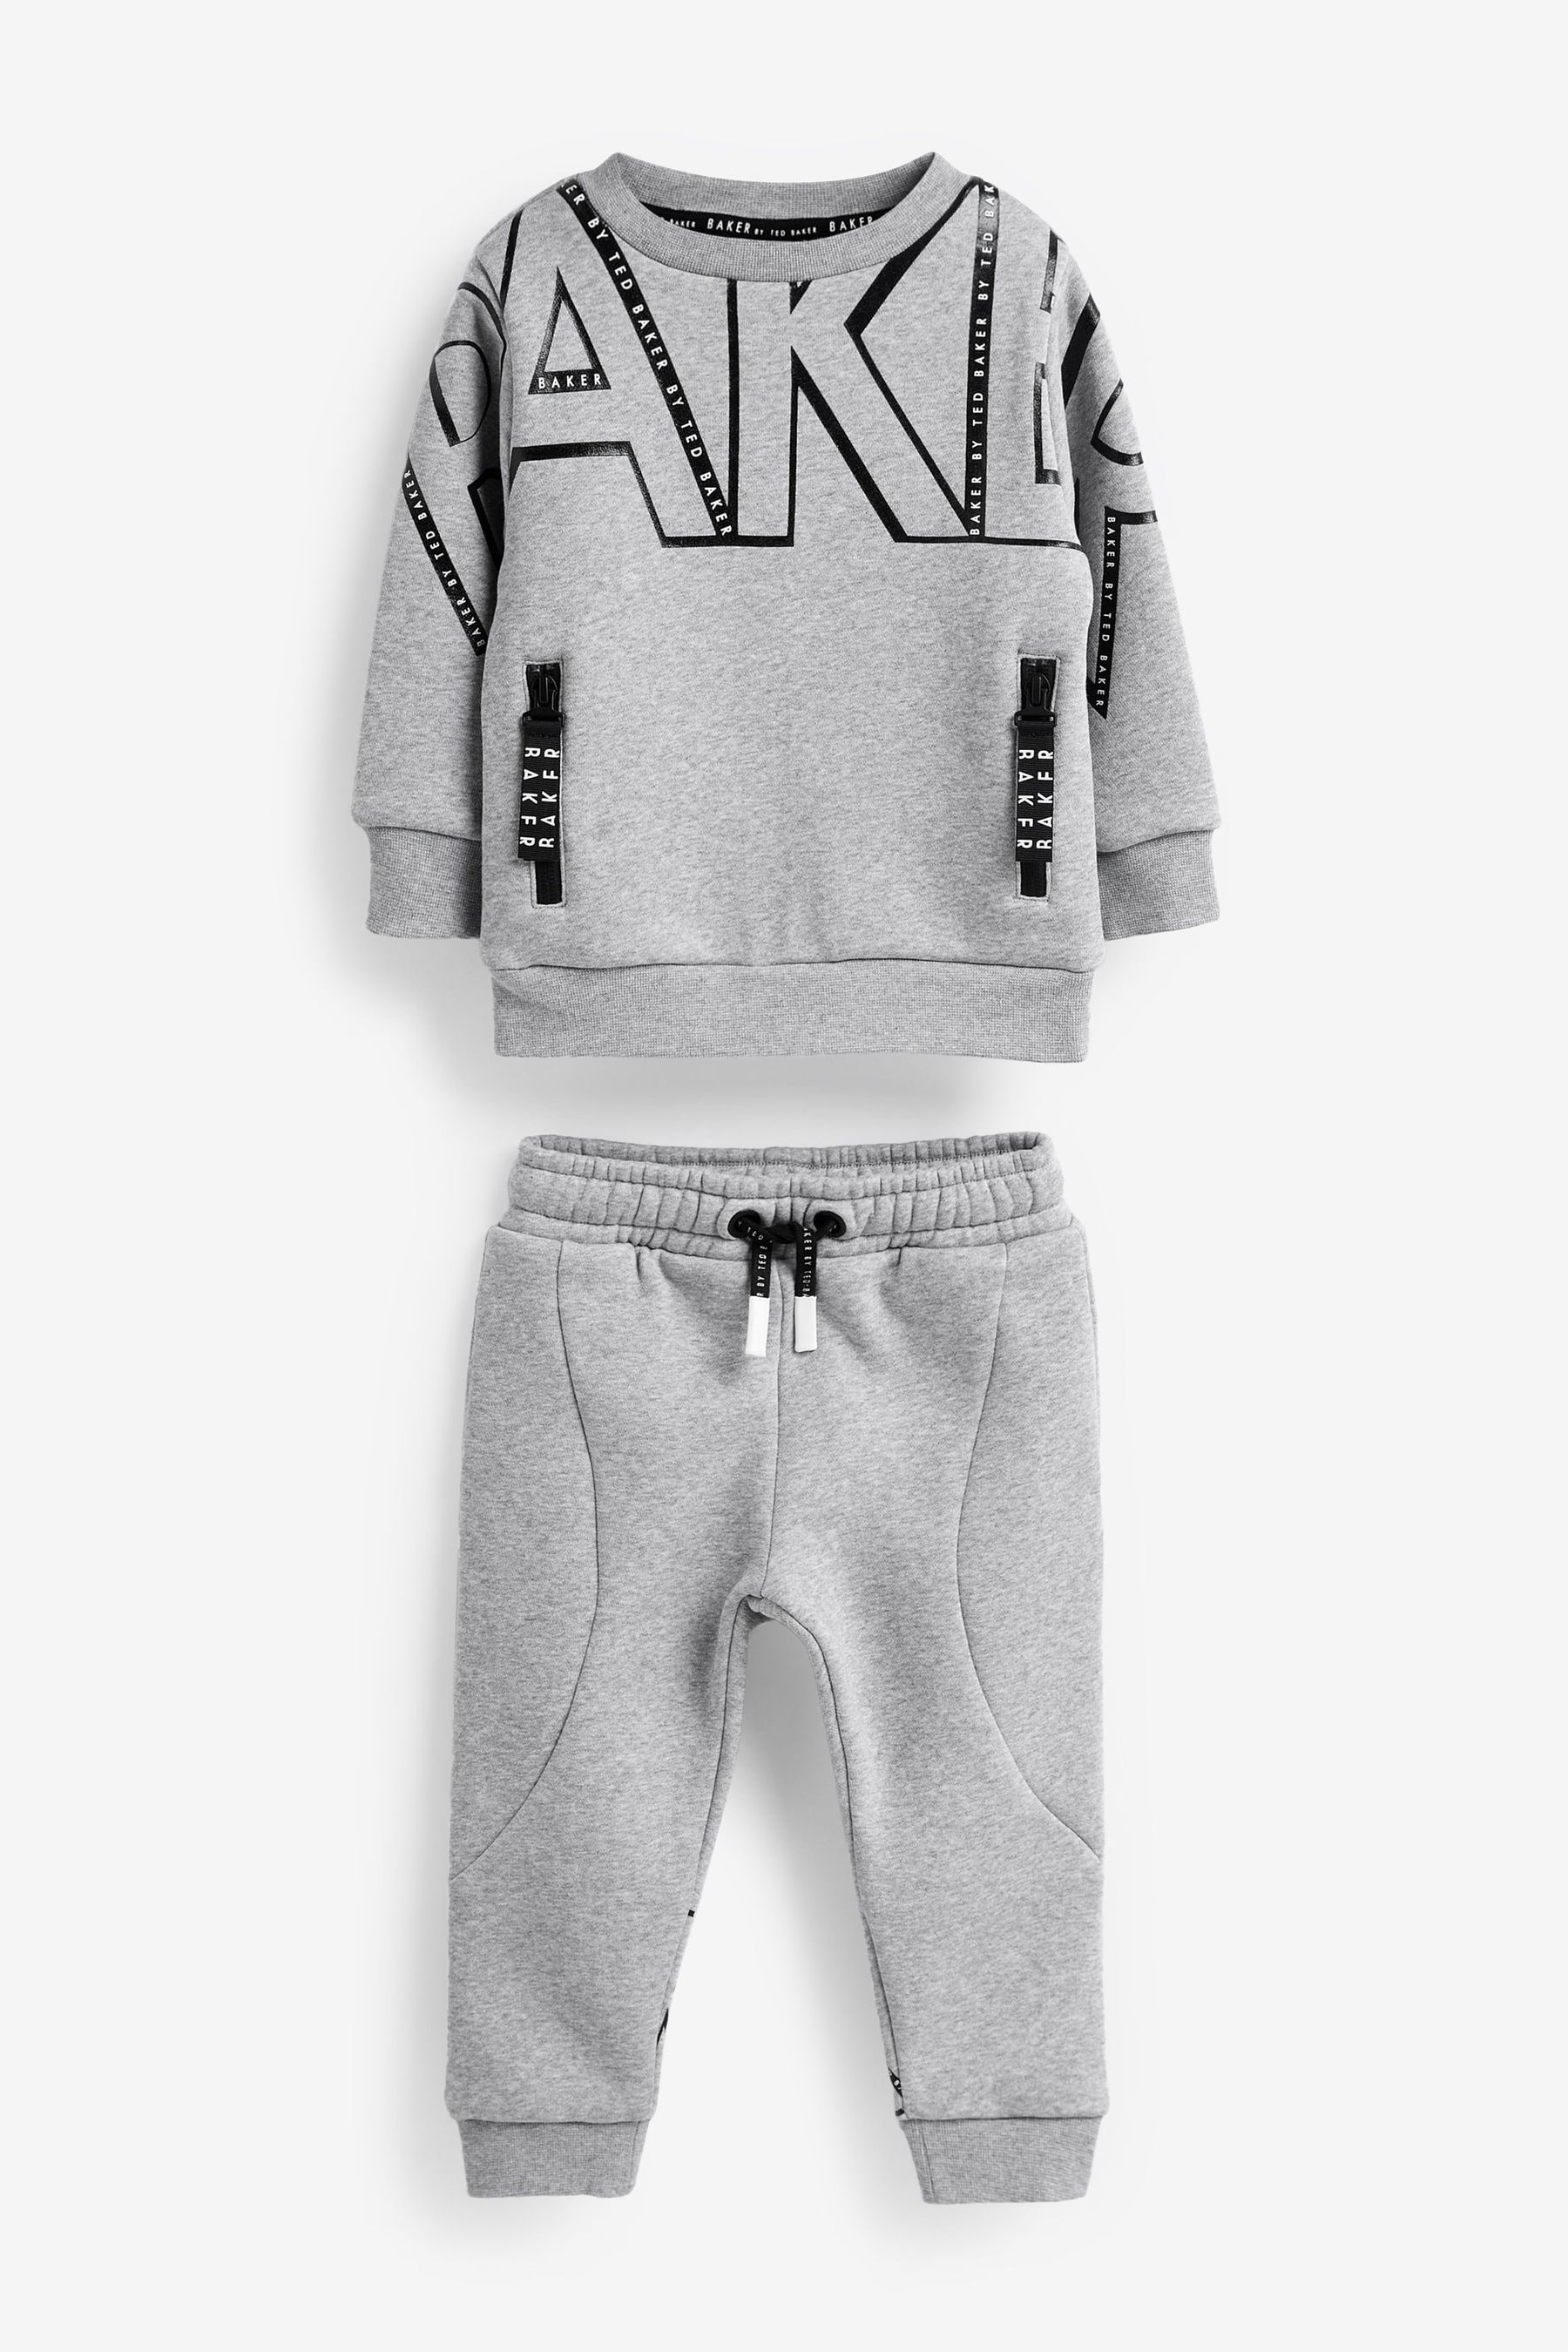 Buy Baker by Ted Baker (0-6yrs) Letter Sweater and Jogger Set from the ...